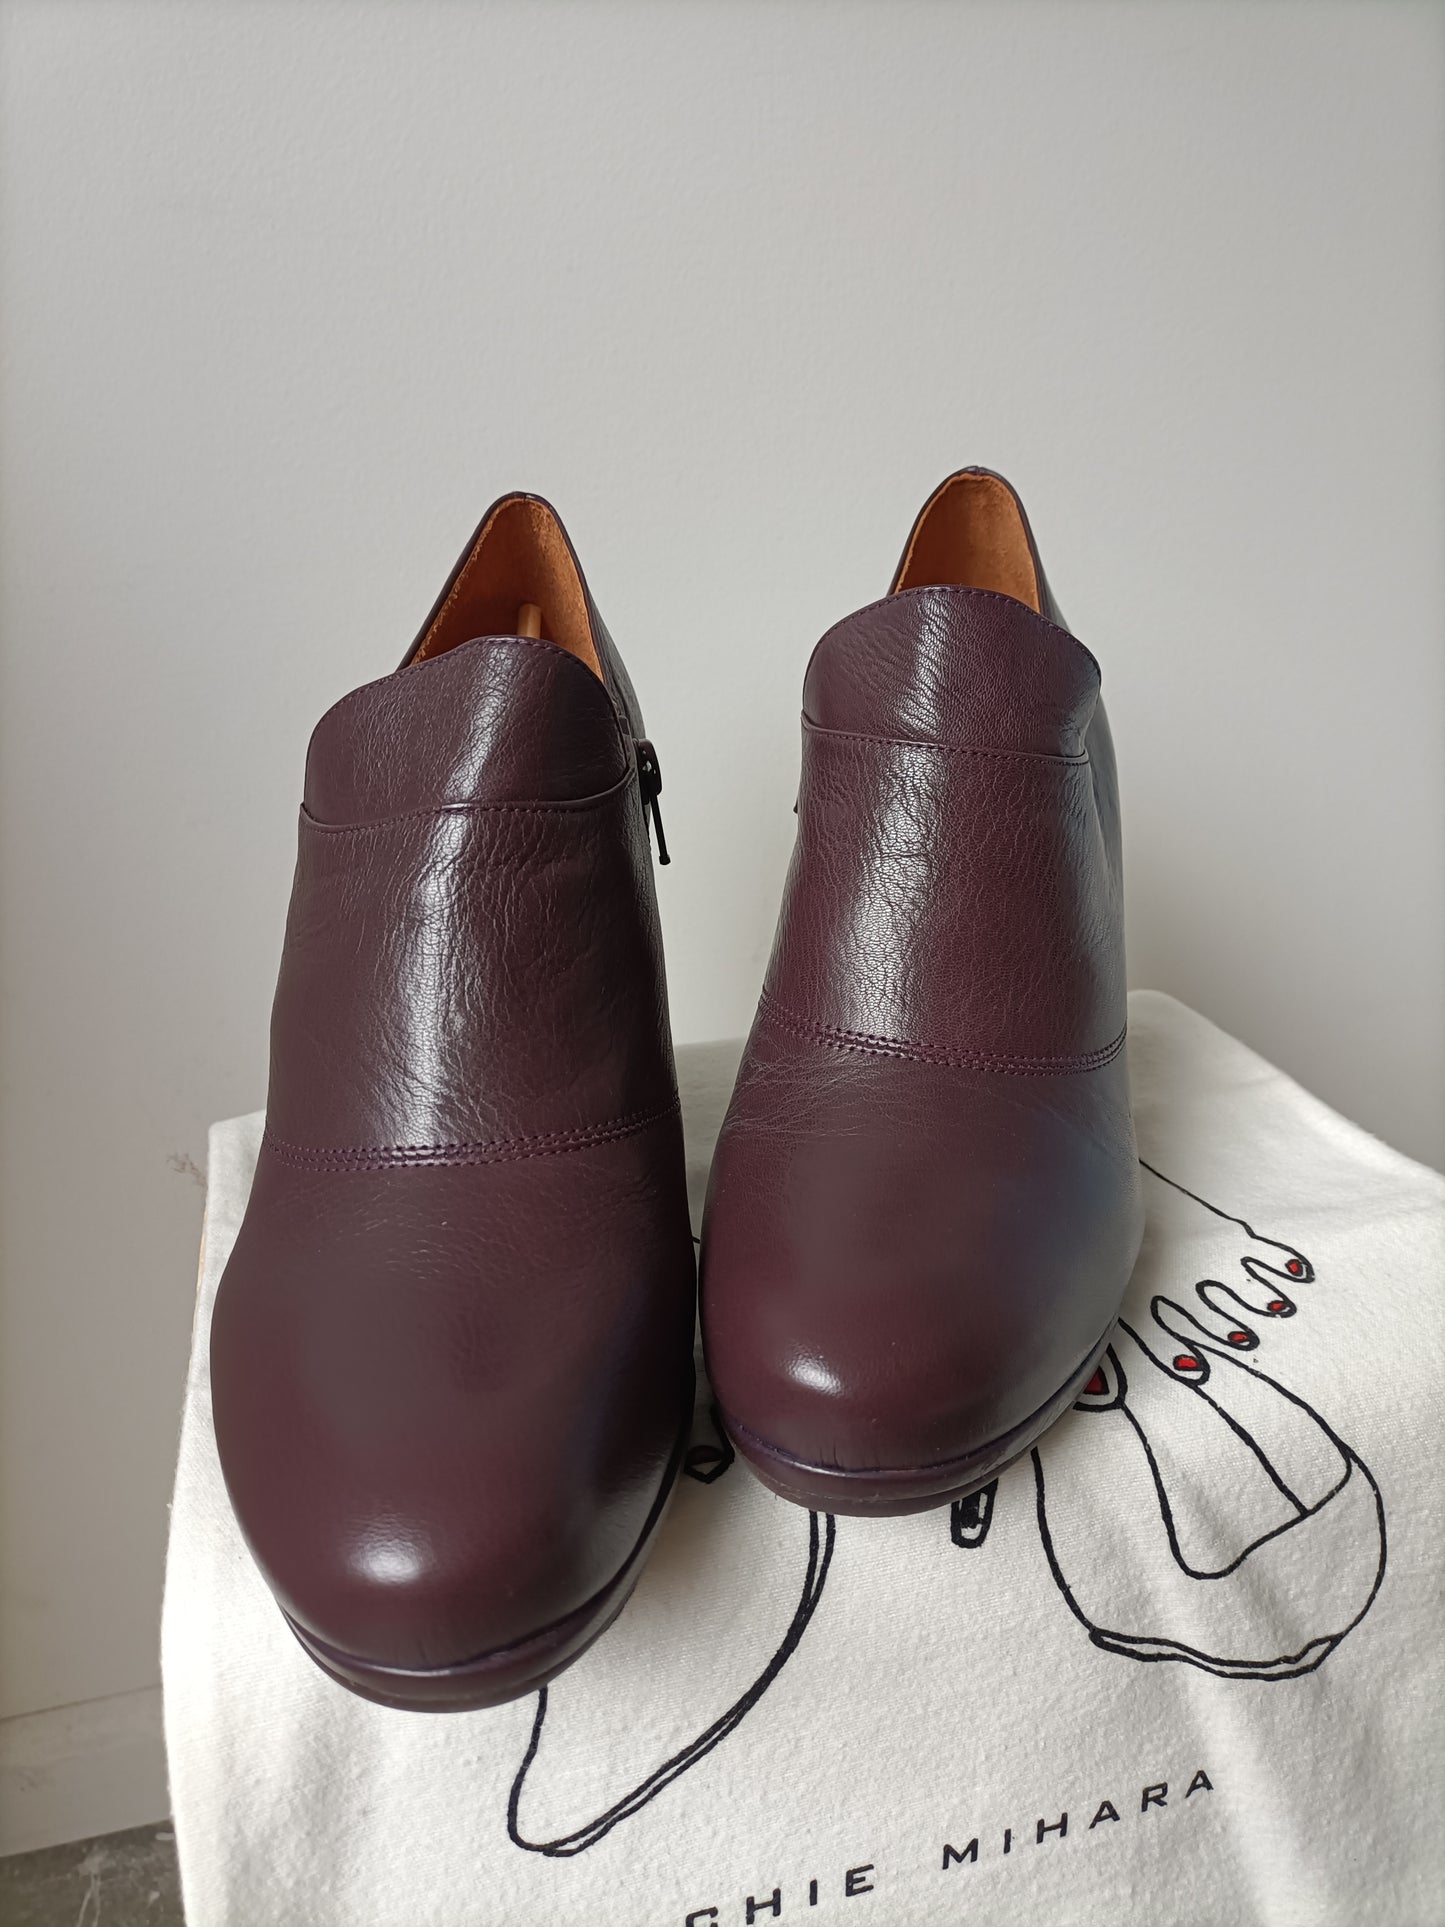 Chie Mihara - Aubergine Leather Bootie - Size 40